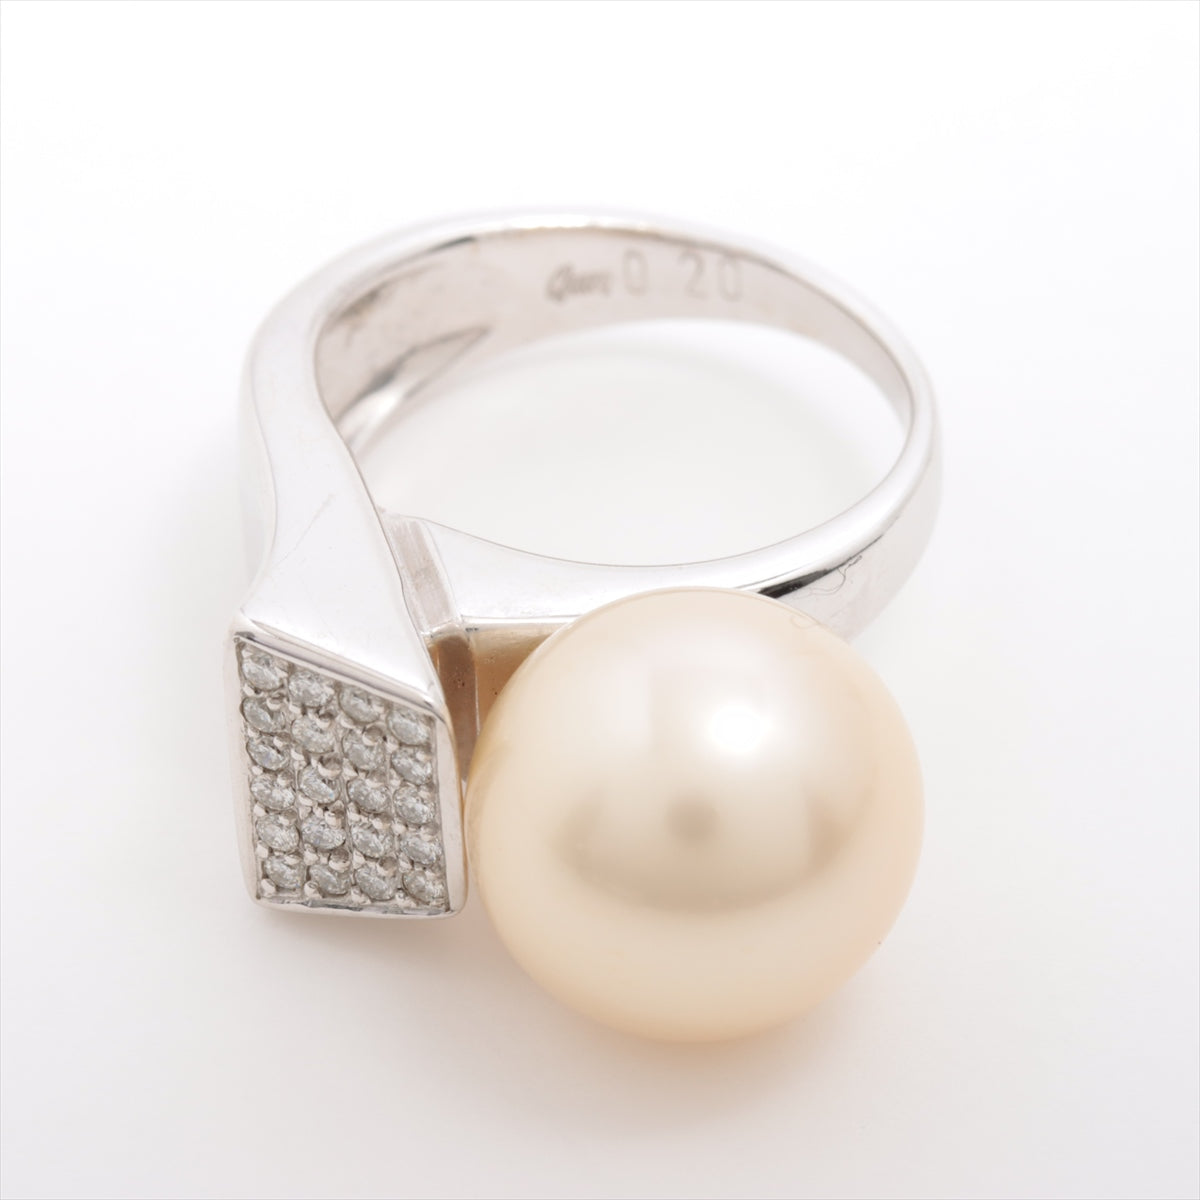 Queen Pearl Diamond Ring 750(WG) 11.5g 0.20 Approx. 12.5 mm